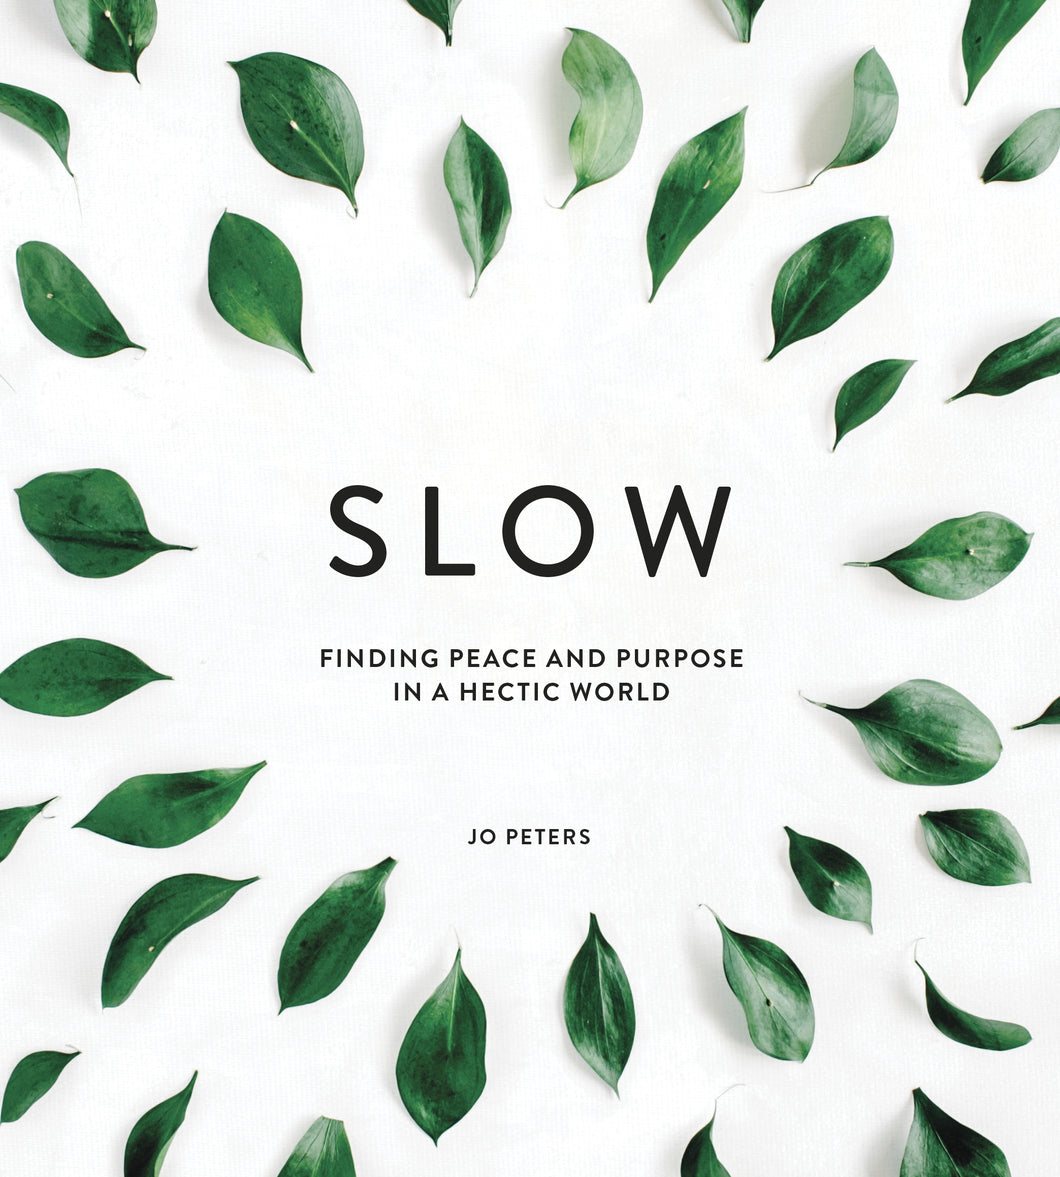 Slow: Finding Peace and Purpose in a Hectic World